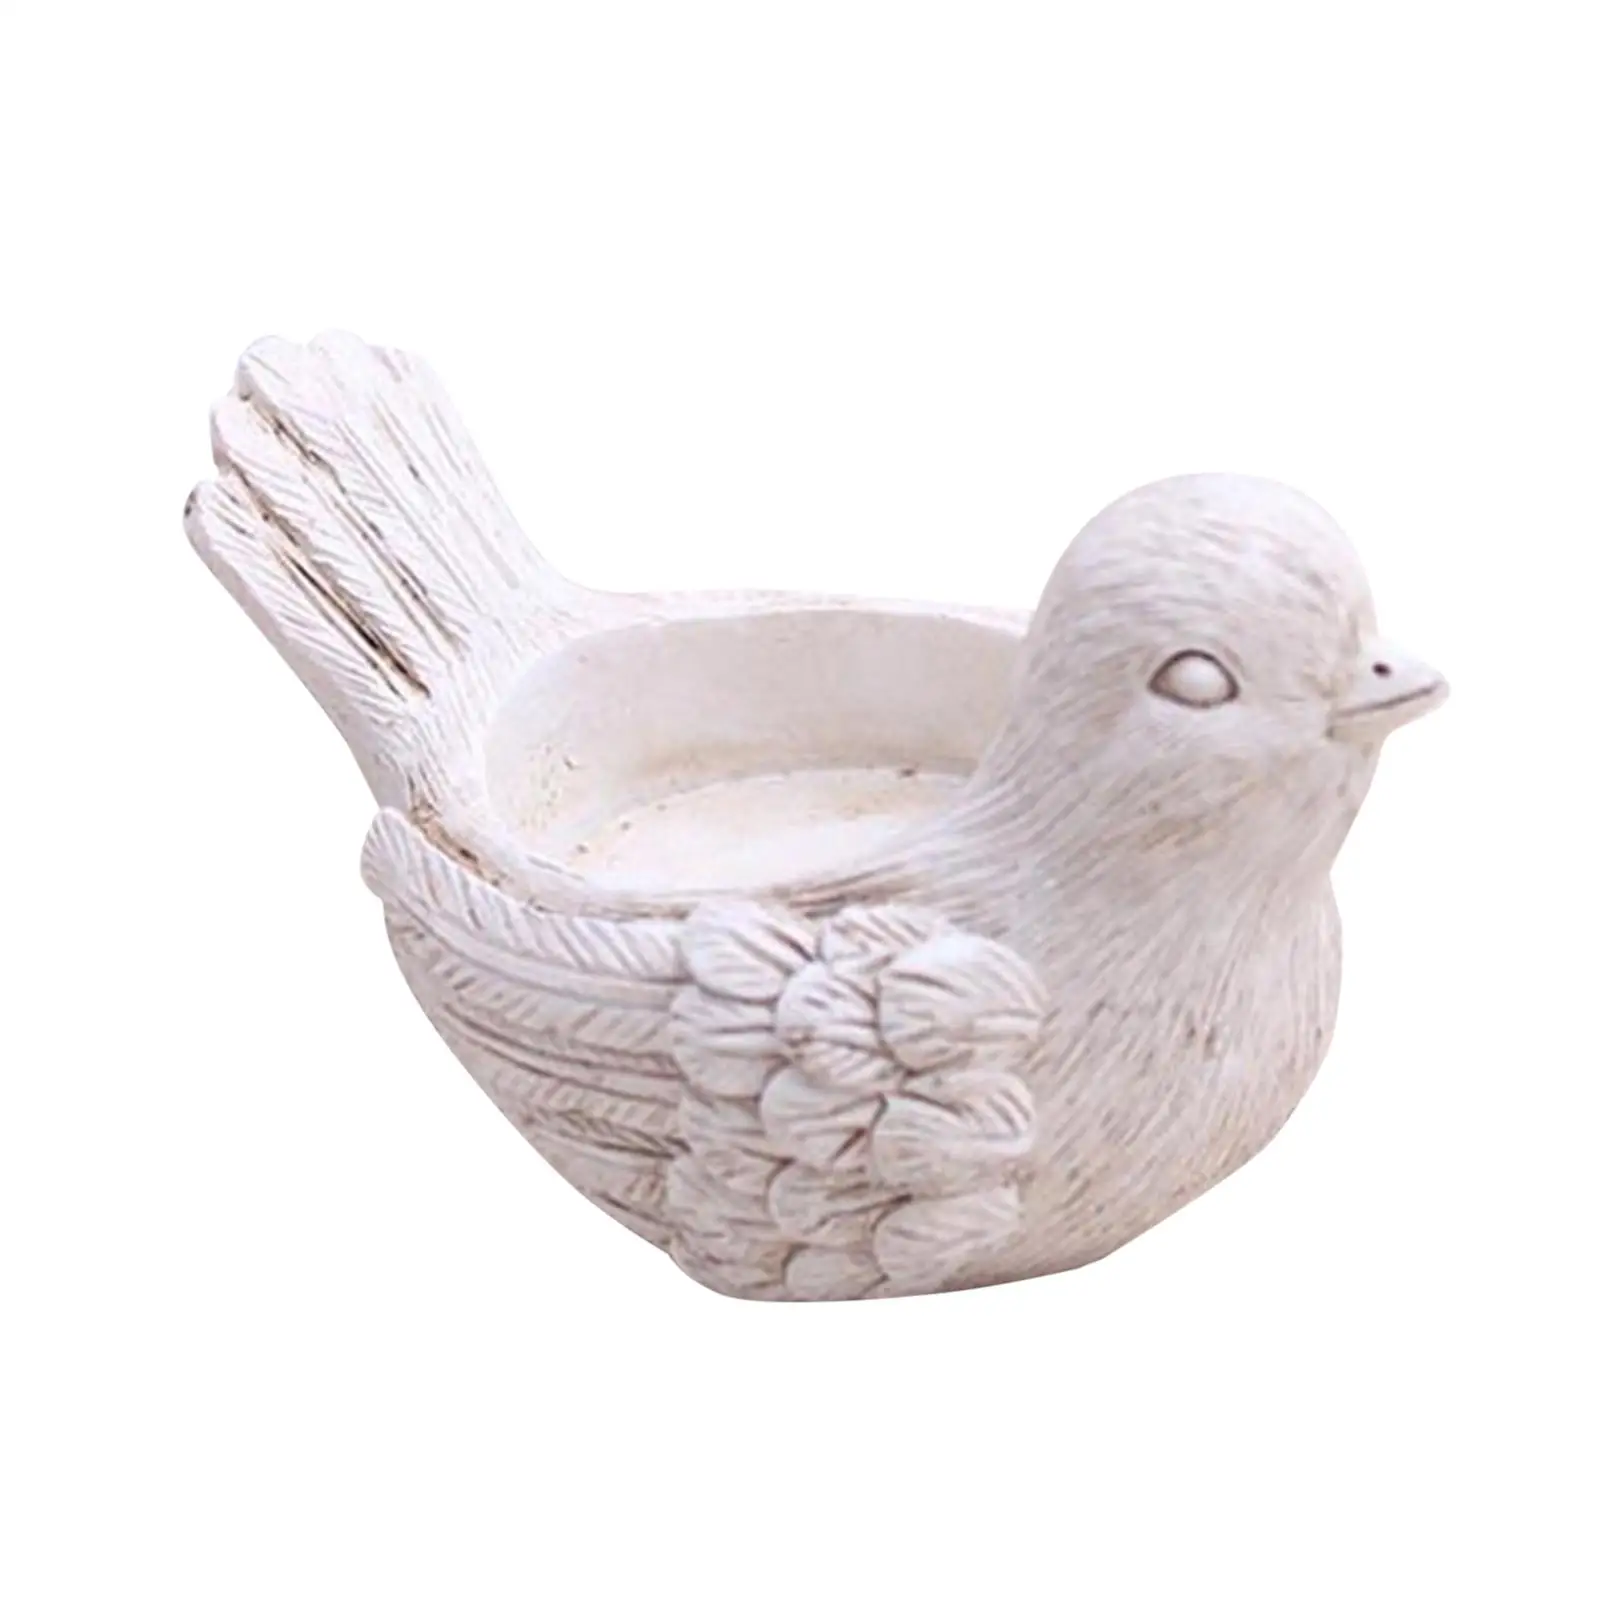 Bird Statue Candle Holder Collection for Party Dinner Table Home Decorations